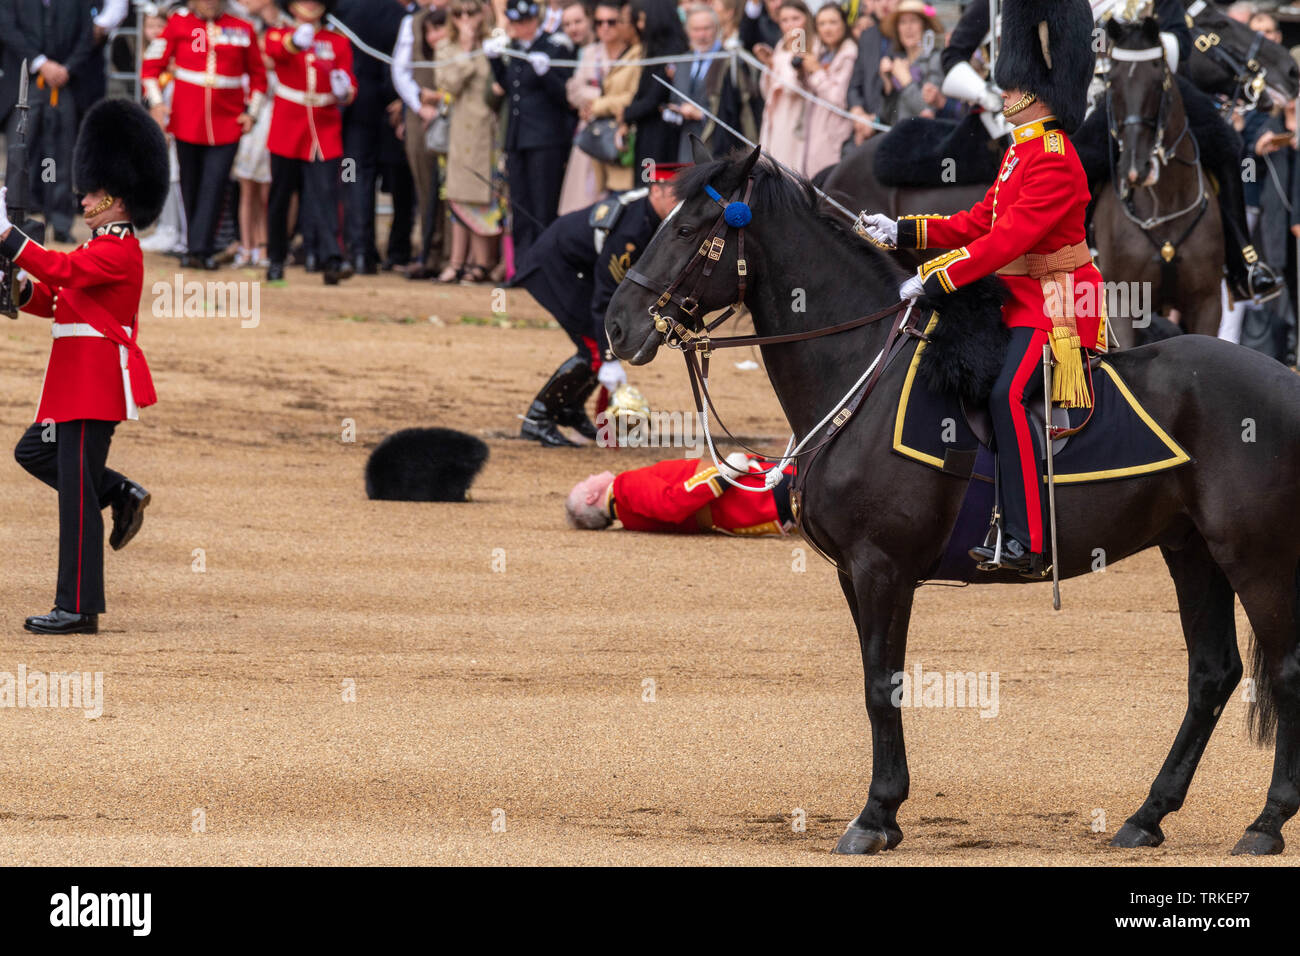 London, UK. 8th June 2019 Trooping the Colour 2019, The Queen's Birthday parade on Horseguards Parade London in the presence of Her Majesty The Queen.  Colour trooped by the 1st Battalion Grenadier Guards  A Guards office Major Niall Hall, of the Regimental Adjutant of the Irish Guards, came off his horse in the parade Credit Ian Davidson/Alamy Live News Stock Photo